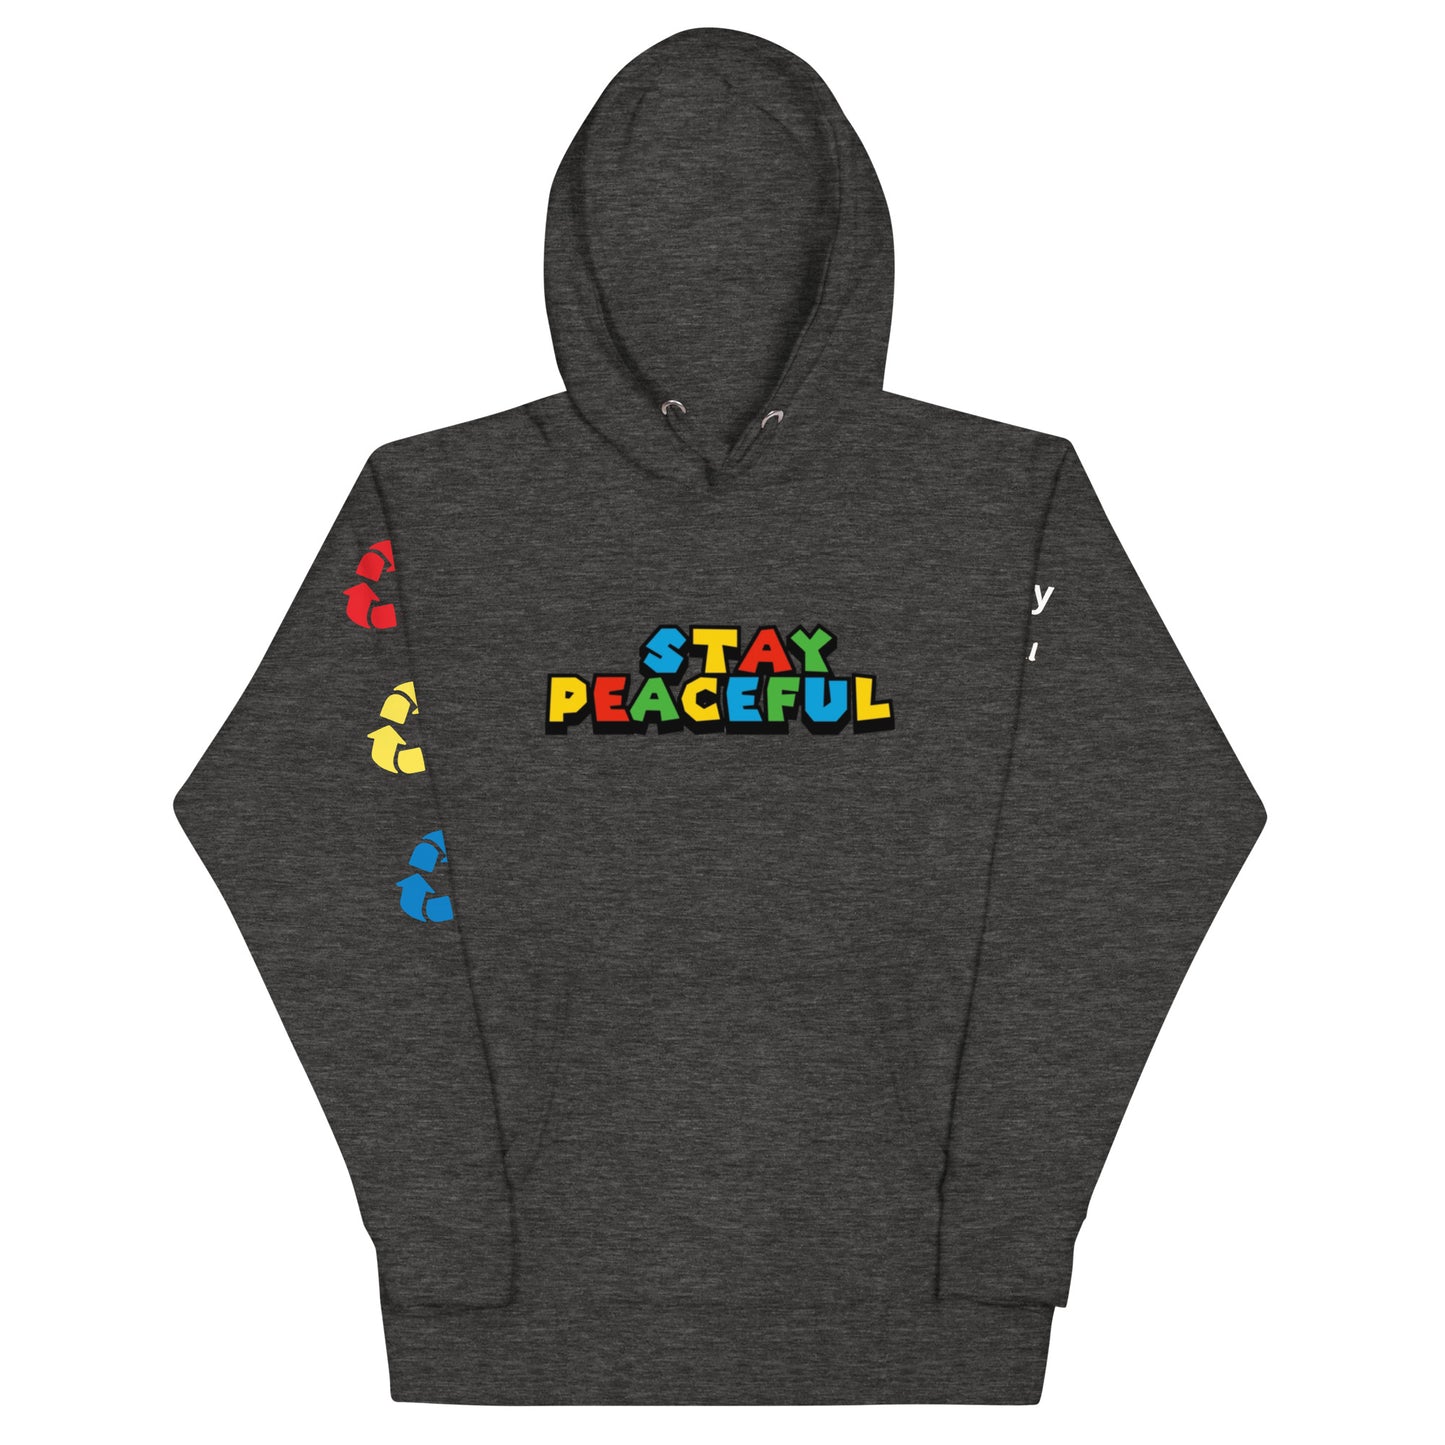 Stay Peaceful Game On Hoodie